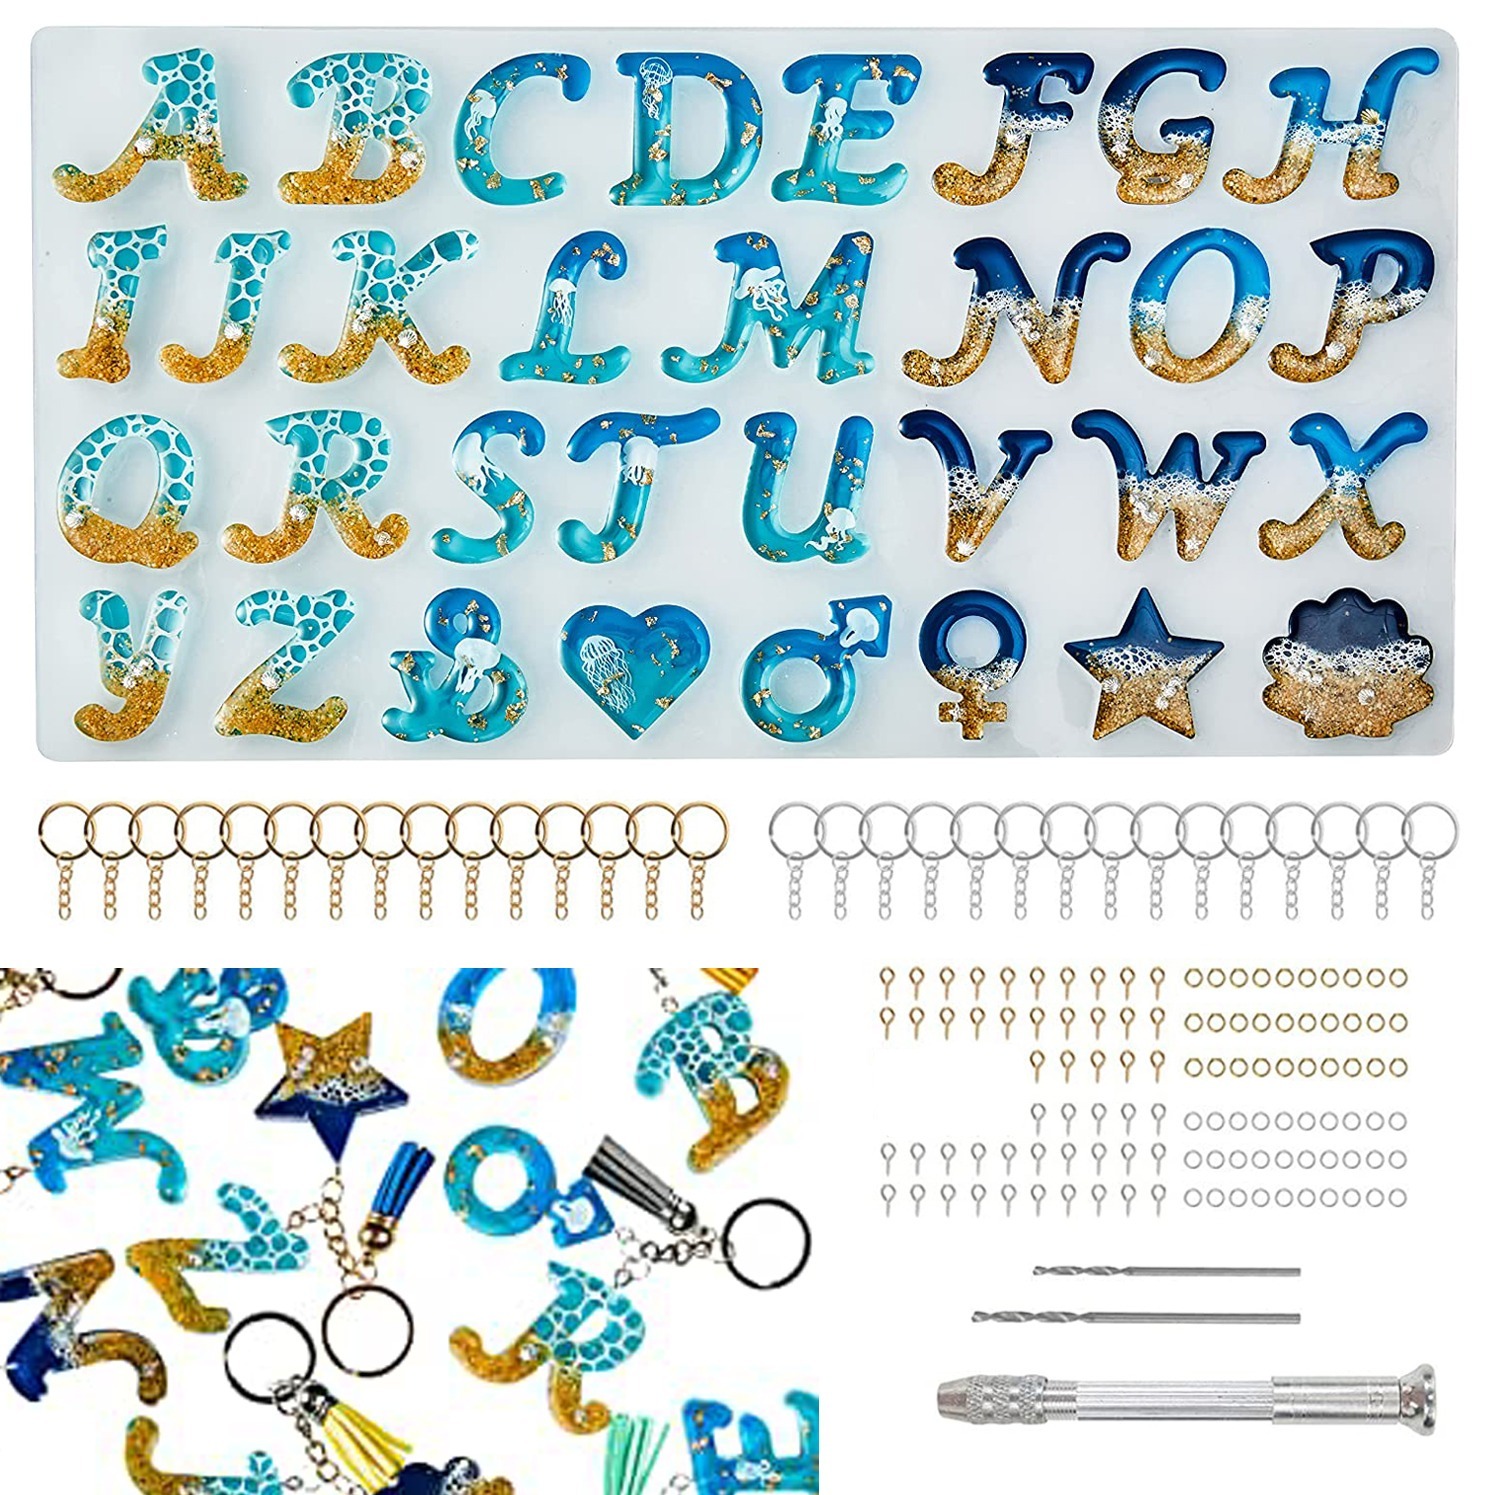 ISSEVE 164Pcs Obverse Alphabet Resin Molds Kit, Silicone Molds for Casting  DIY, Letter & Ornament Epoxy Molds Keychain Making Set with 1 Hand Drill 2